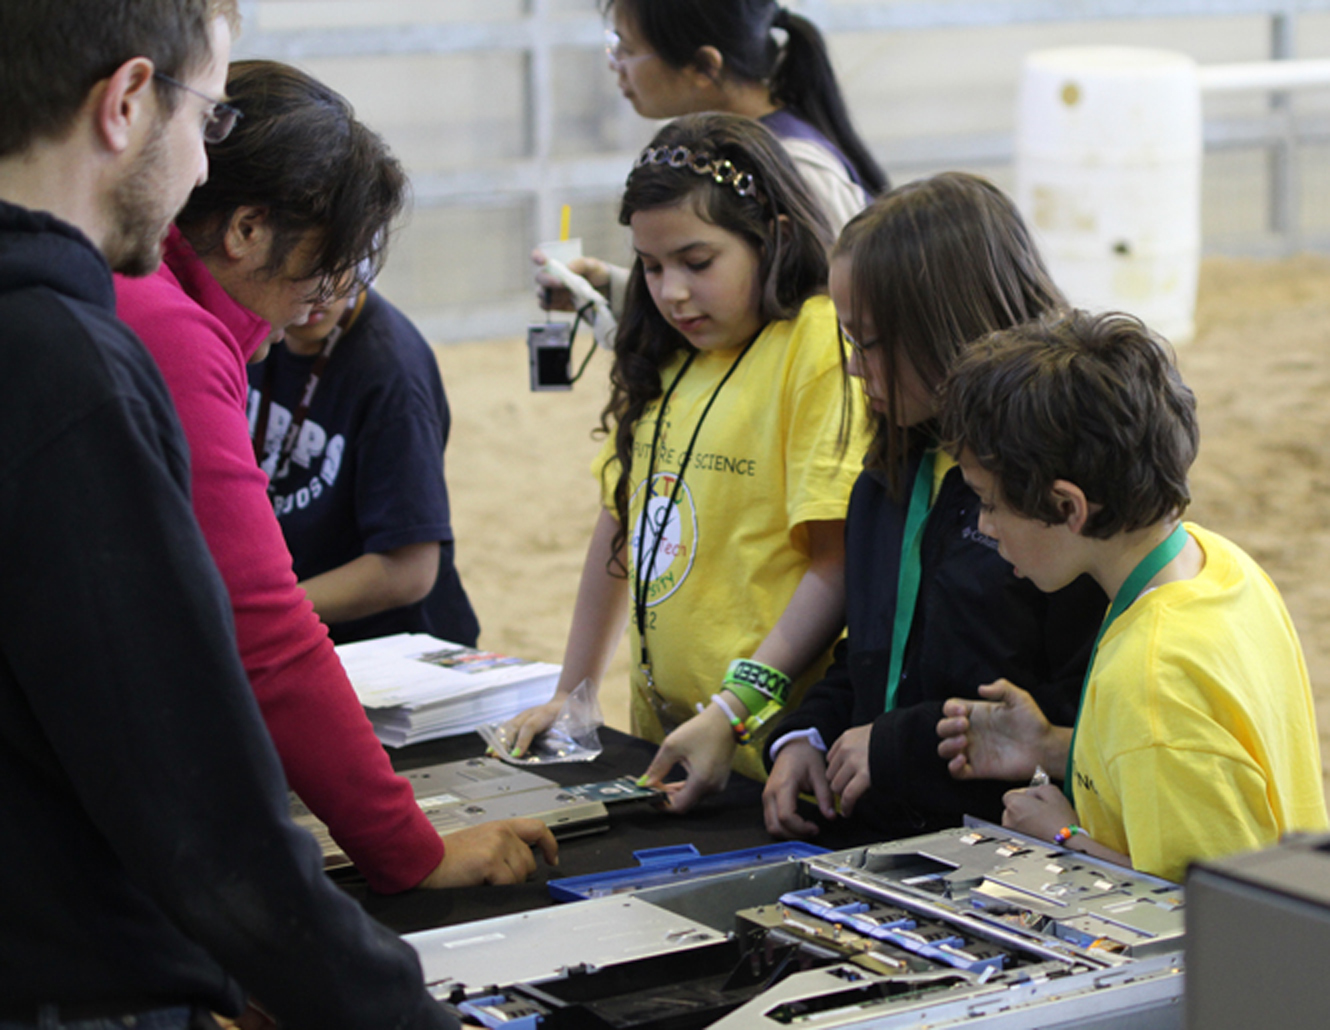 Children engaging with science at the Rackspace booth during Kids' Tech University hands-on activity.